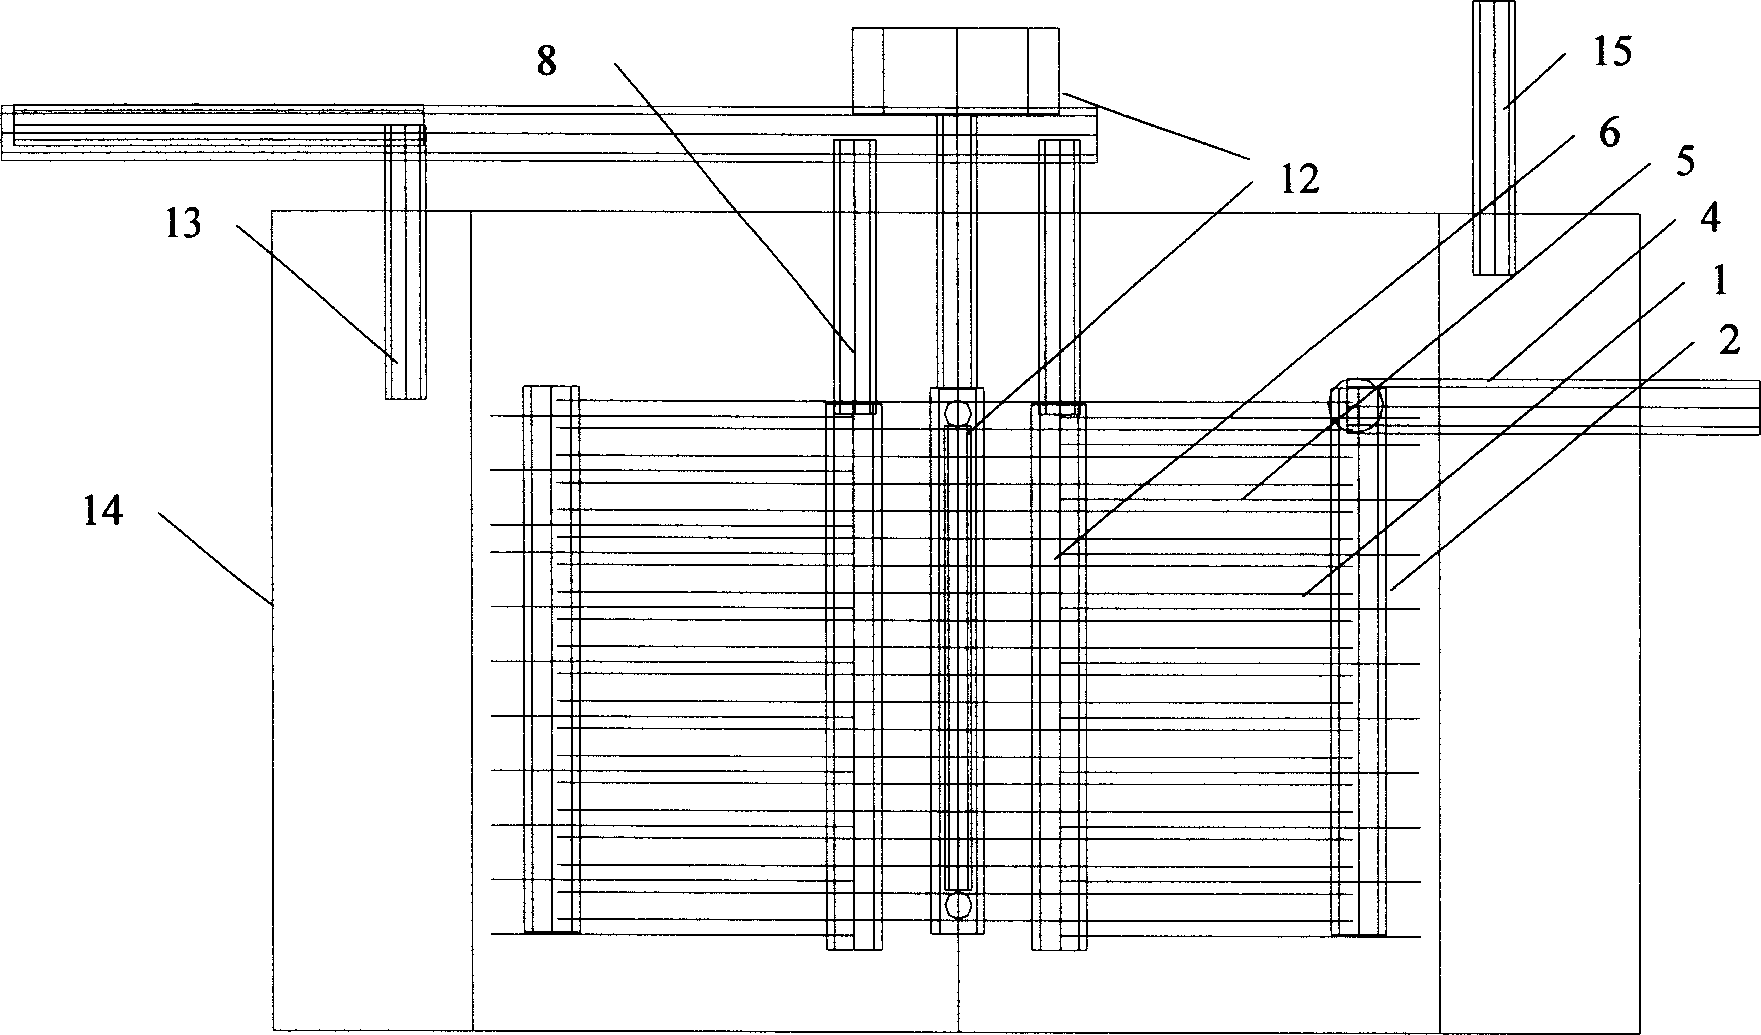 Membrane rector with rotary brush